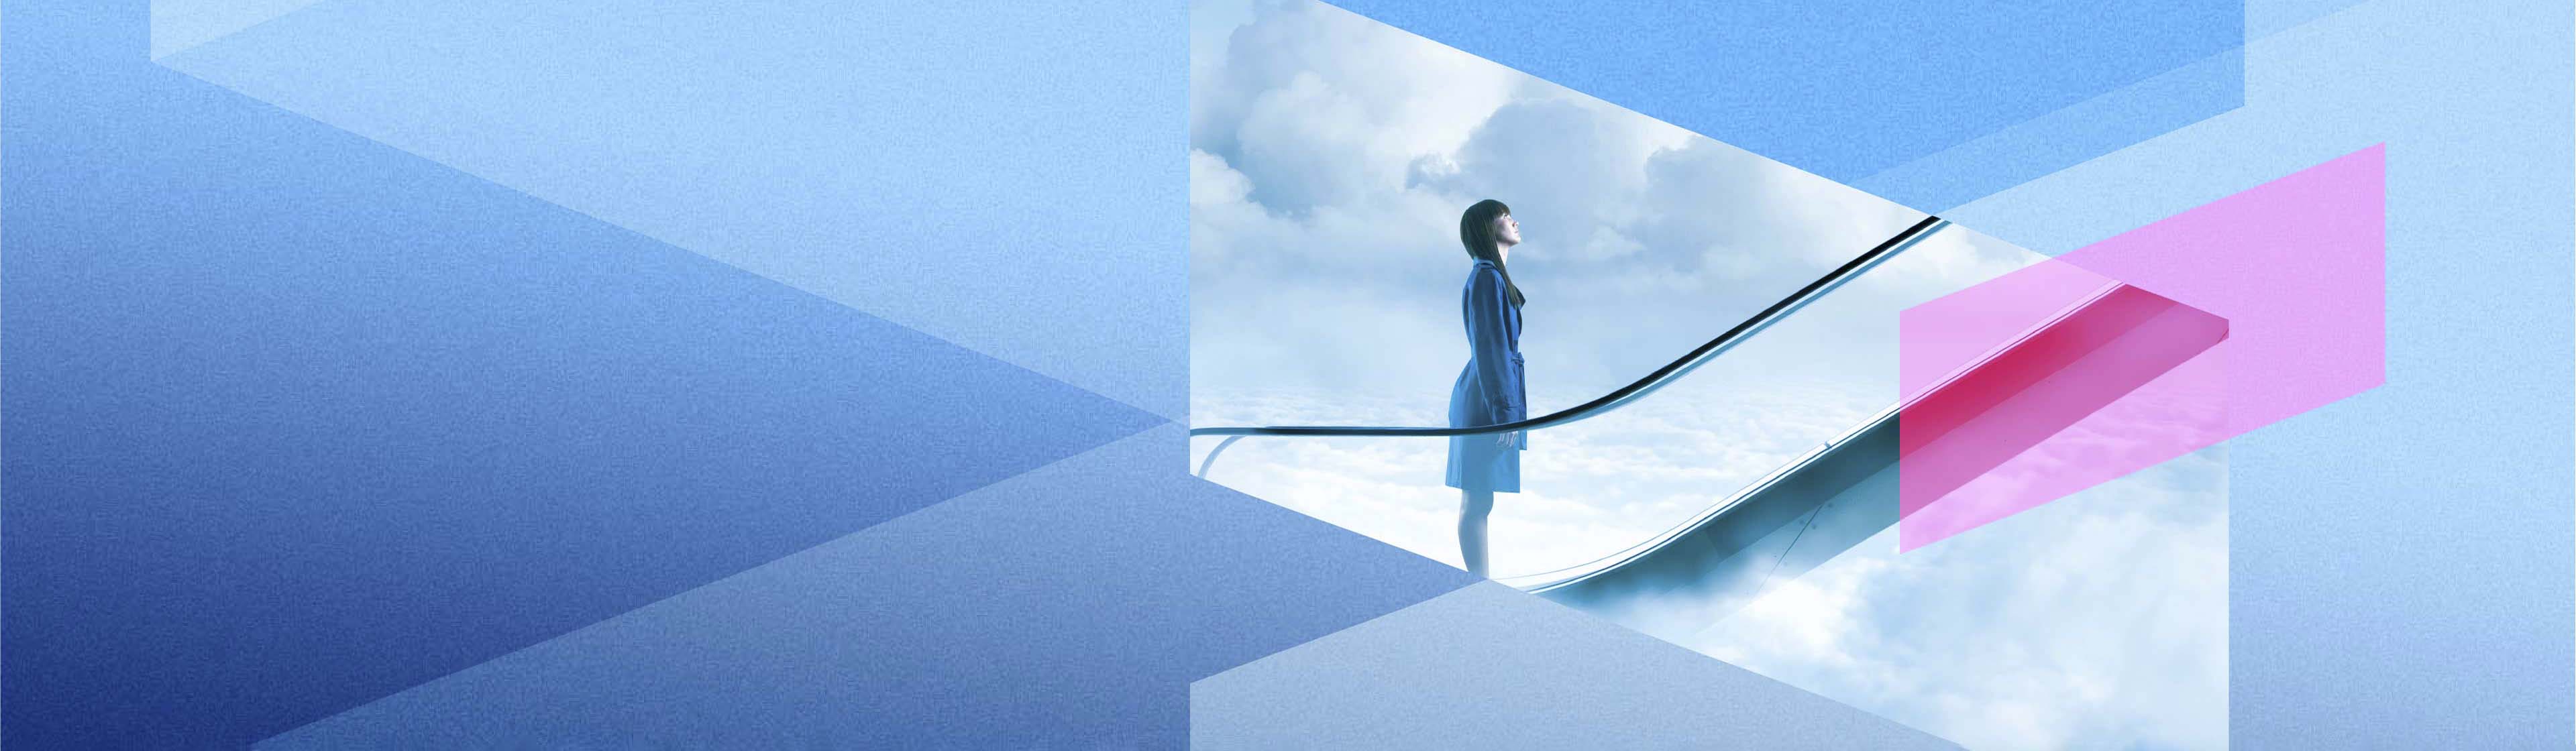 A woman looking up a escalator in the clouds surrounded by angular geometric shapes